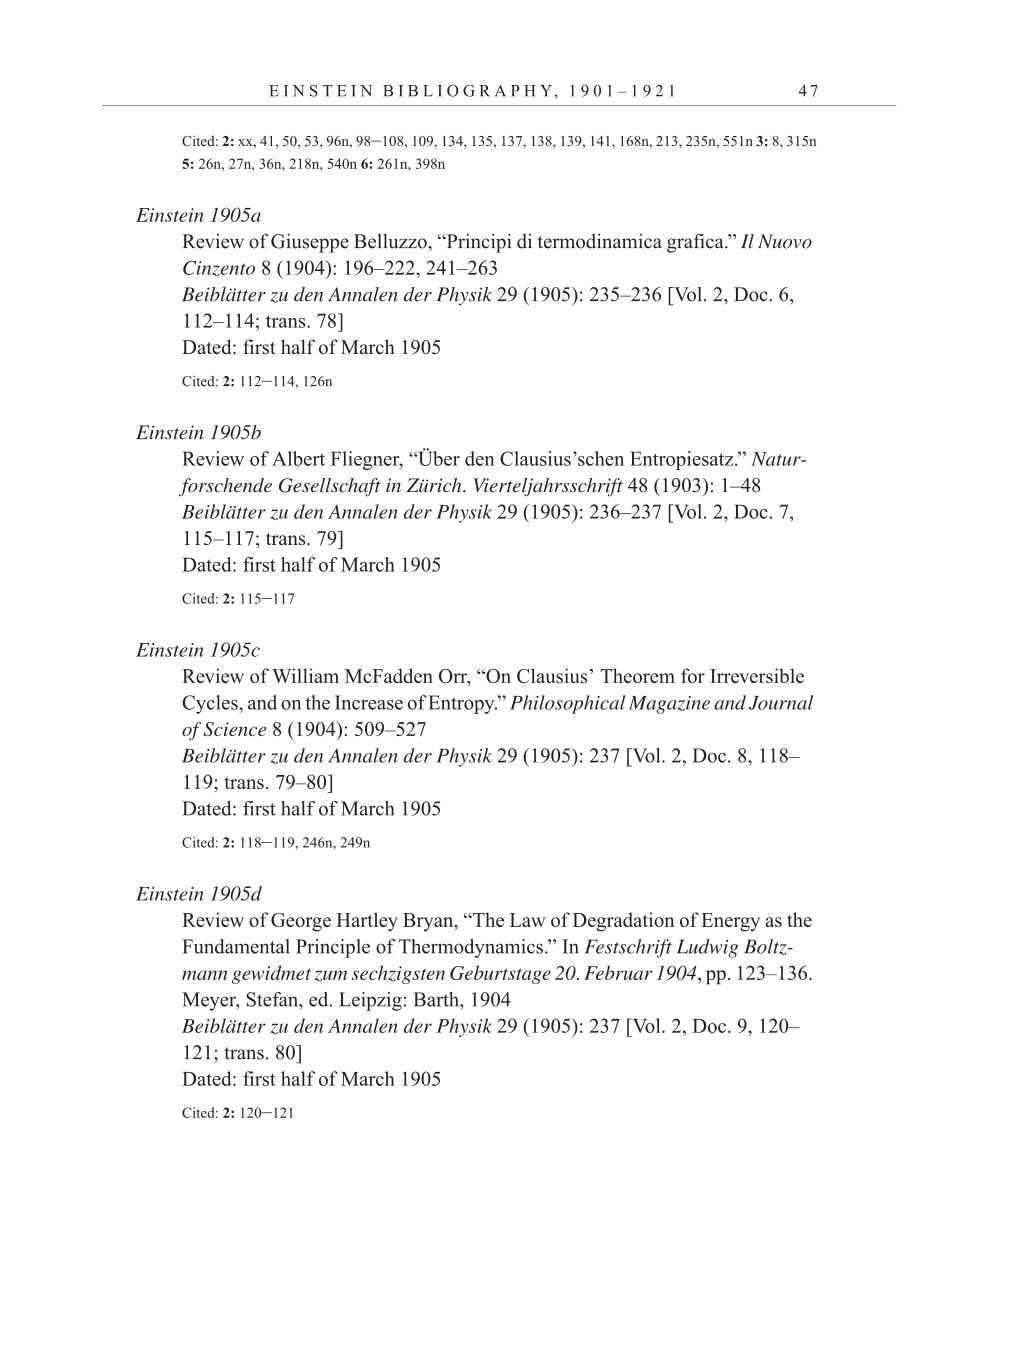 Volume 11: Cumulative Index, Bibliography, List of Correspondence, Chronology, and Errata to Volumes 1-10 page 47